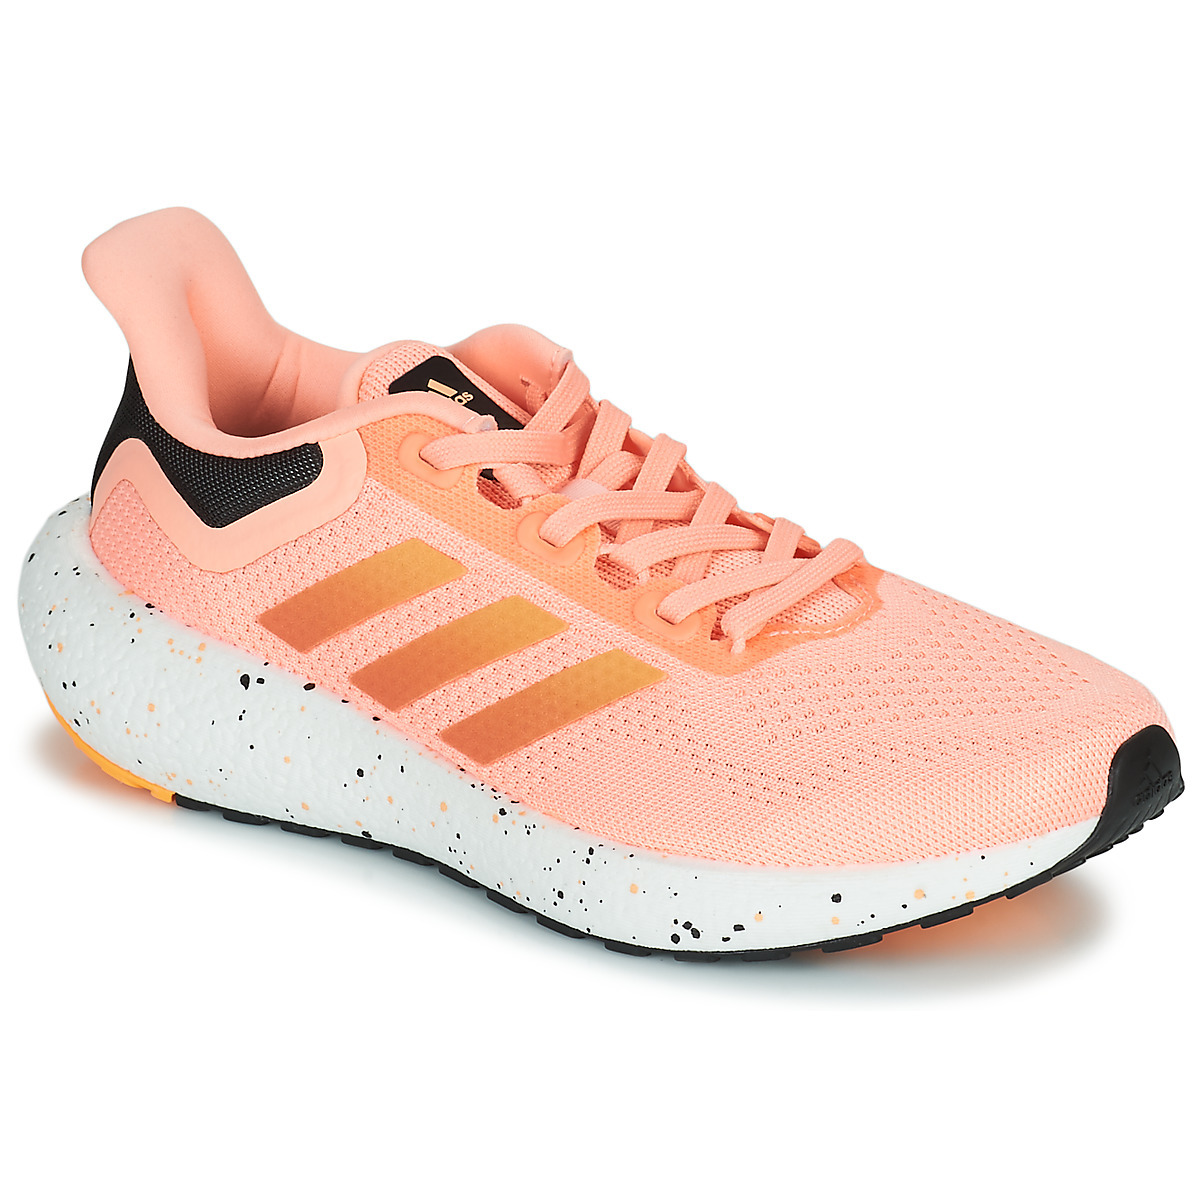 Adidas - Running Shoes in Pink - Spartoo - Woman GOOFASH